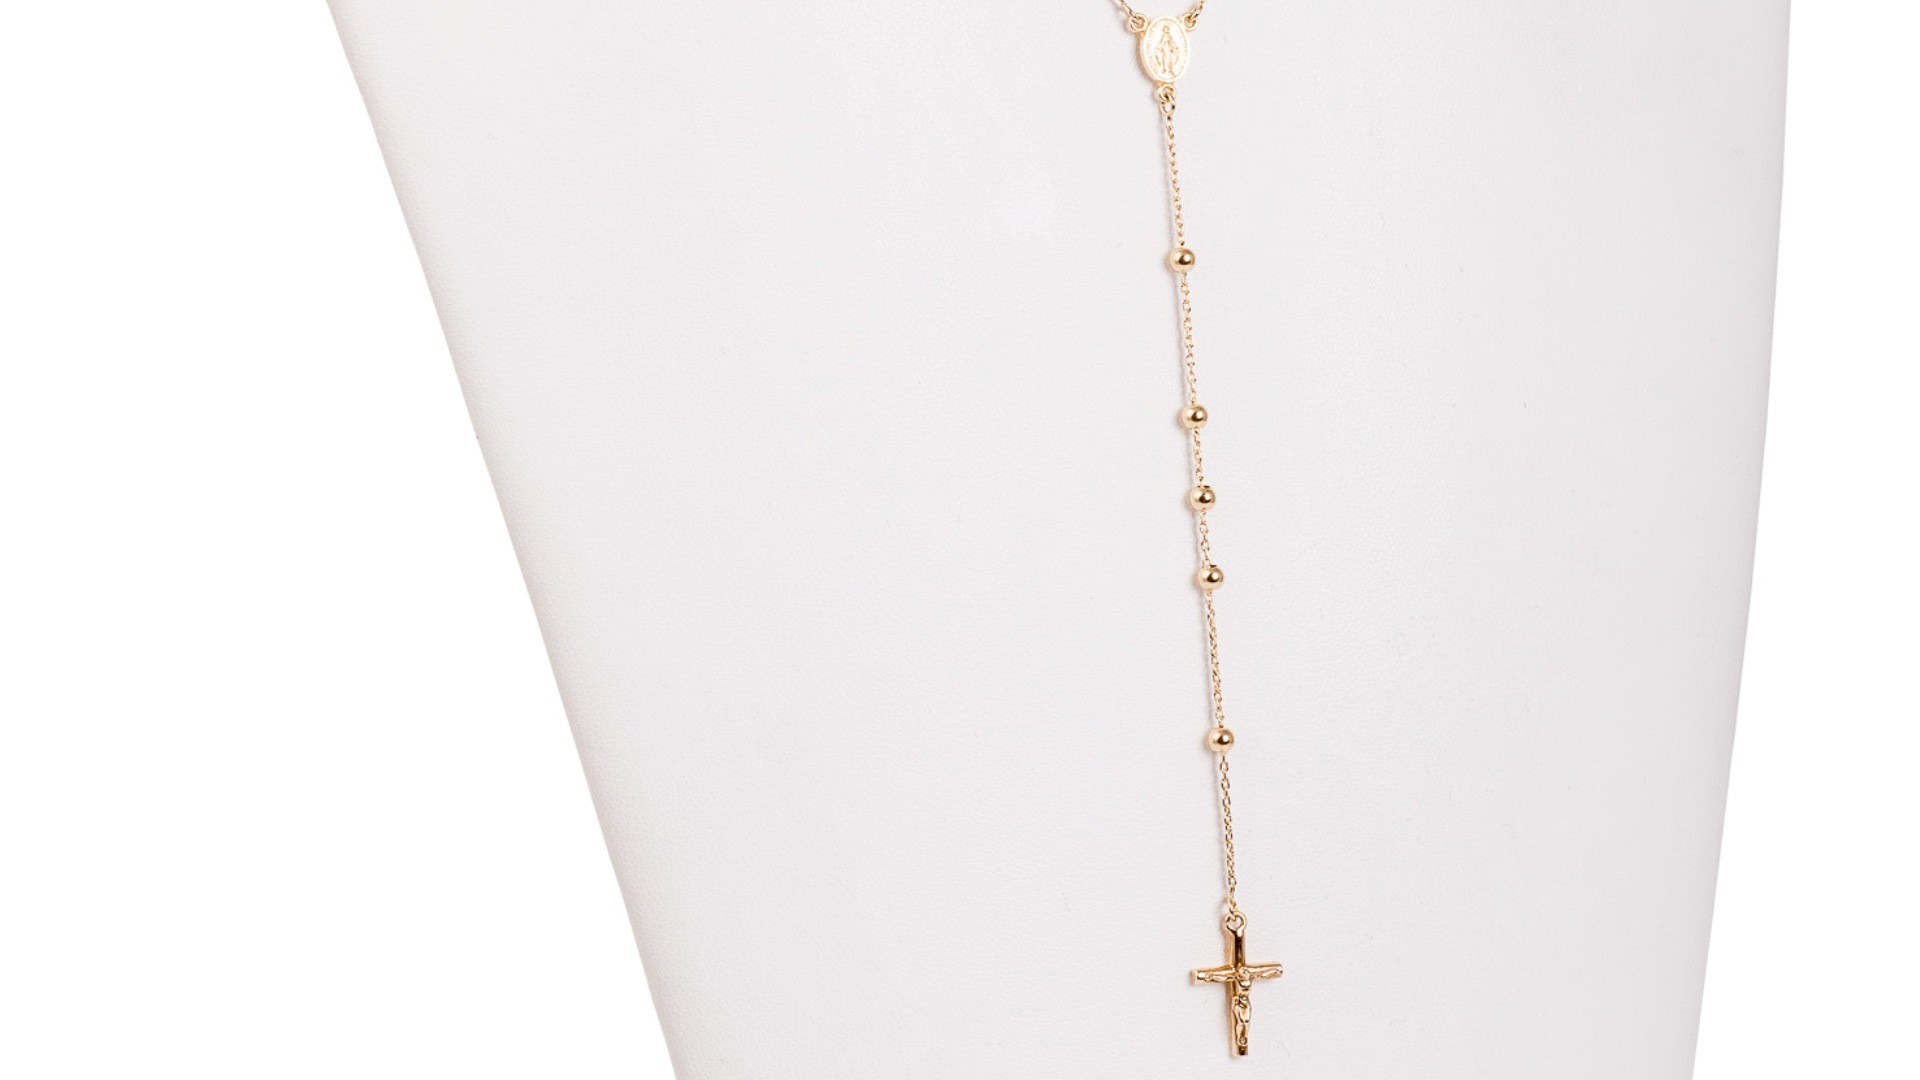 gold pendant with a religious cross pendant